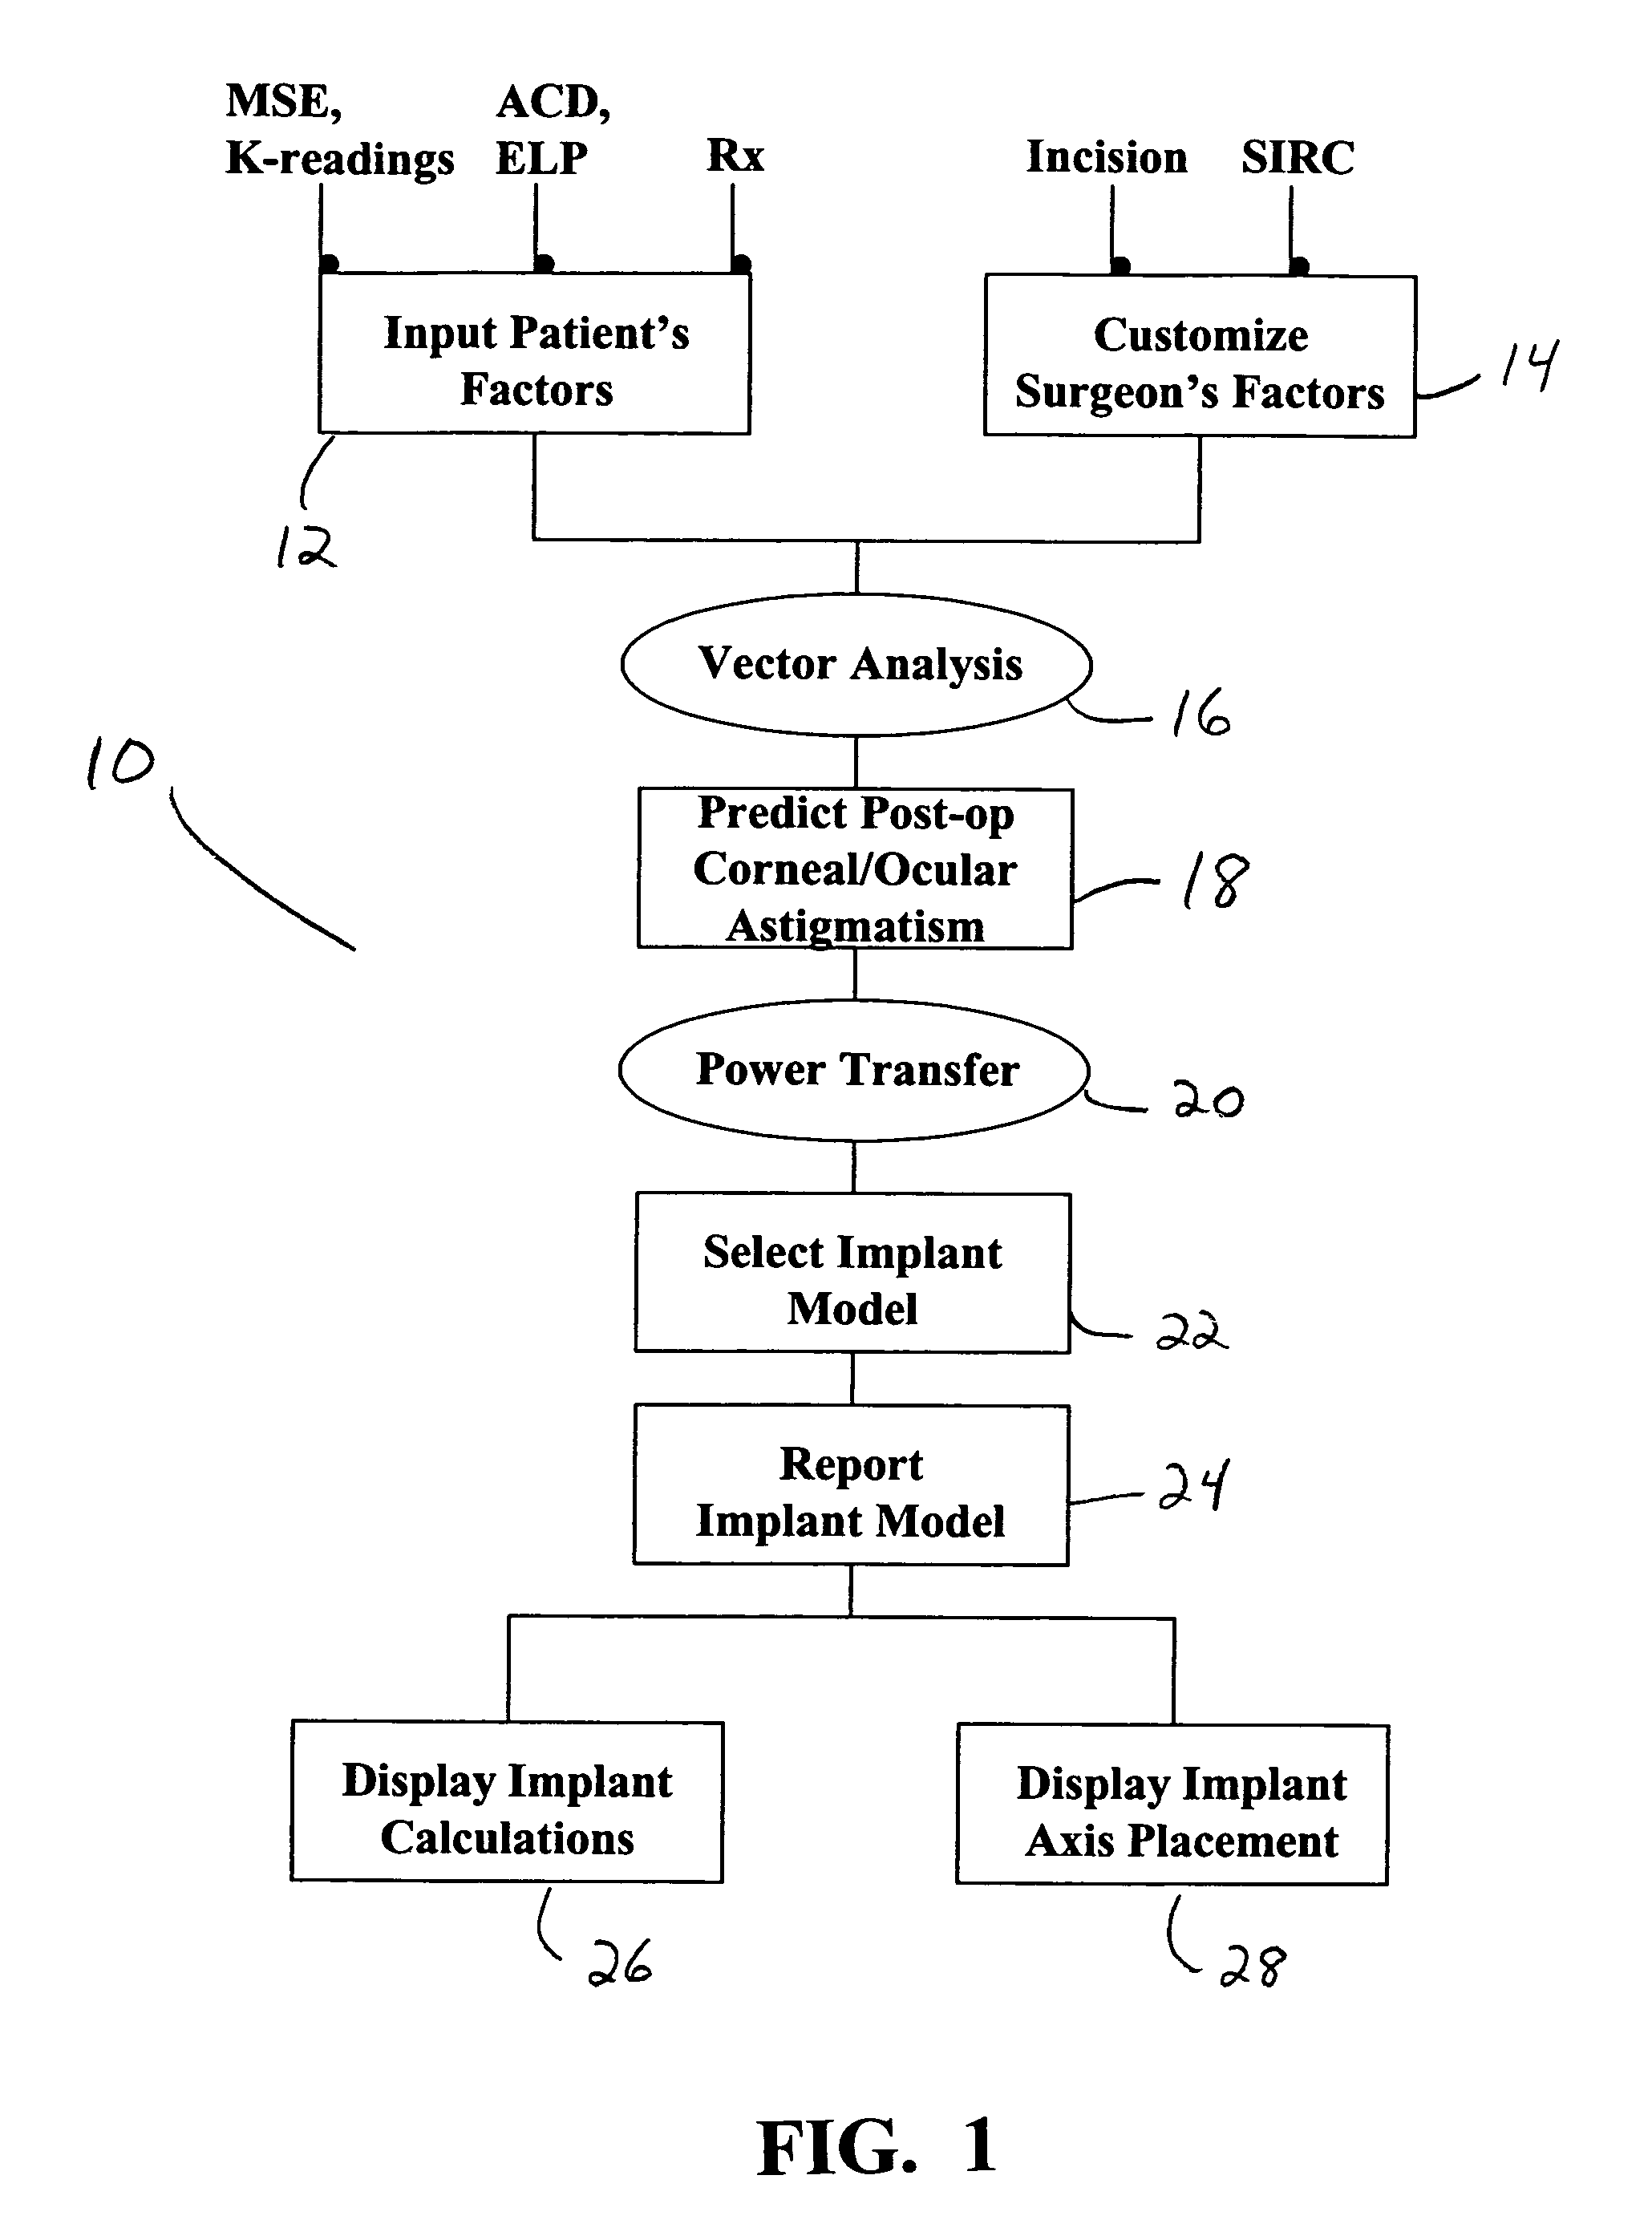 Method of calculating the required lens power for an opthalmic implant